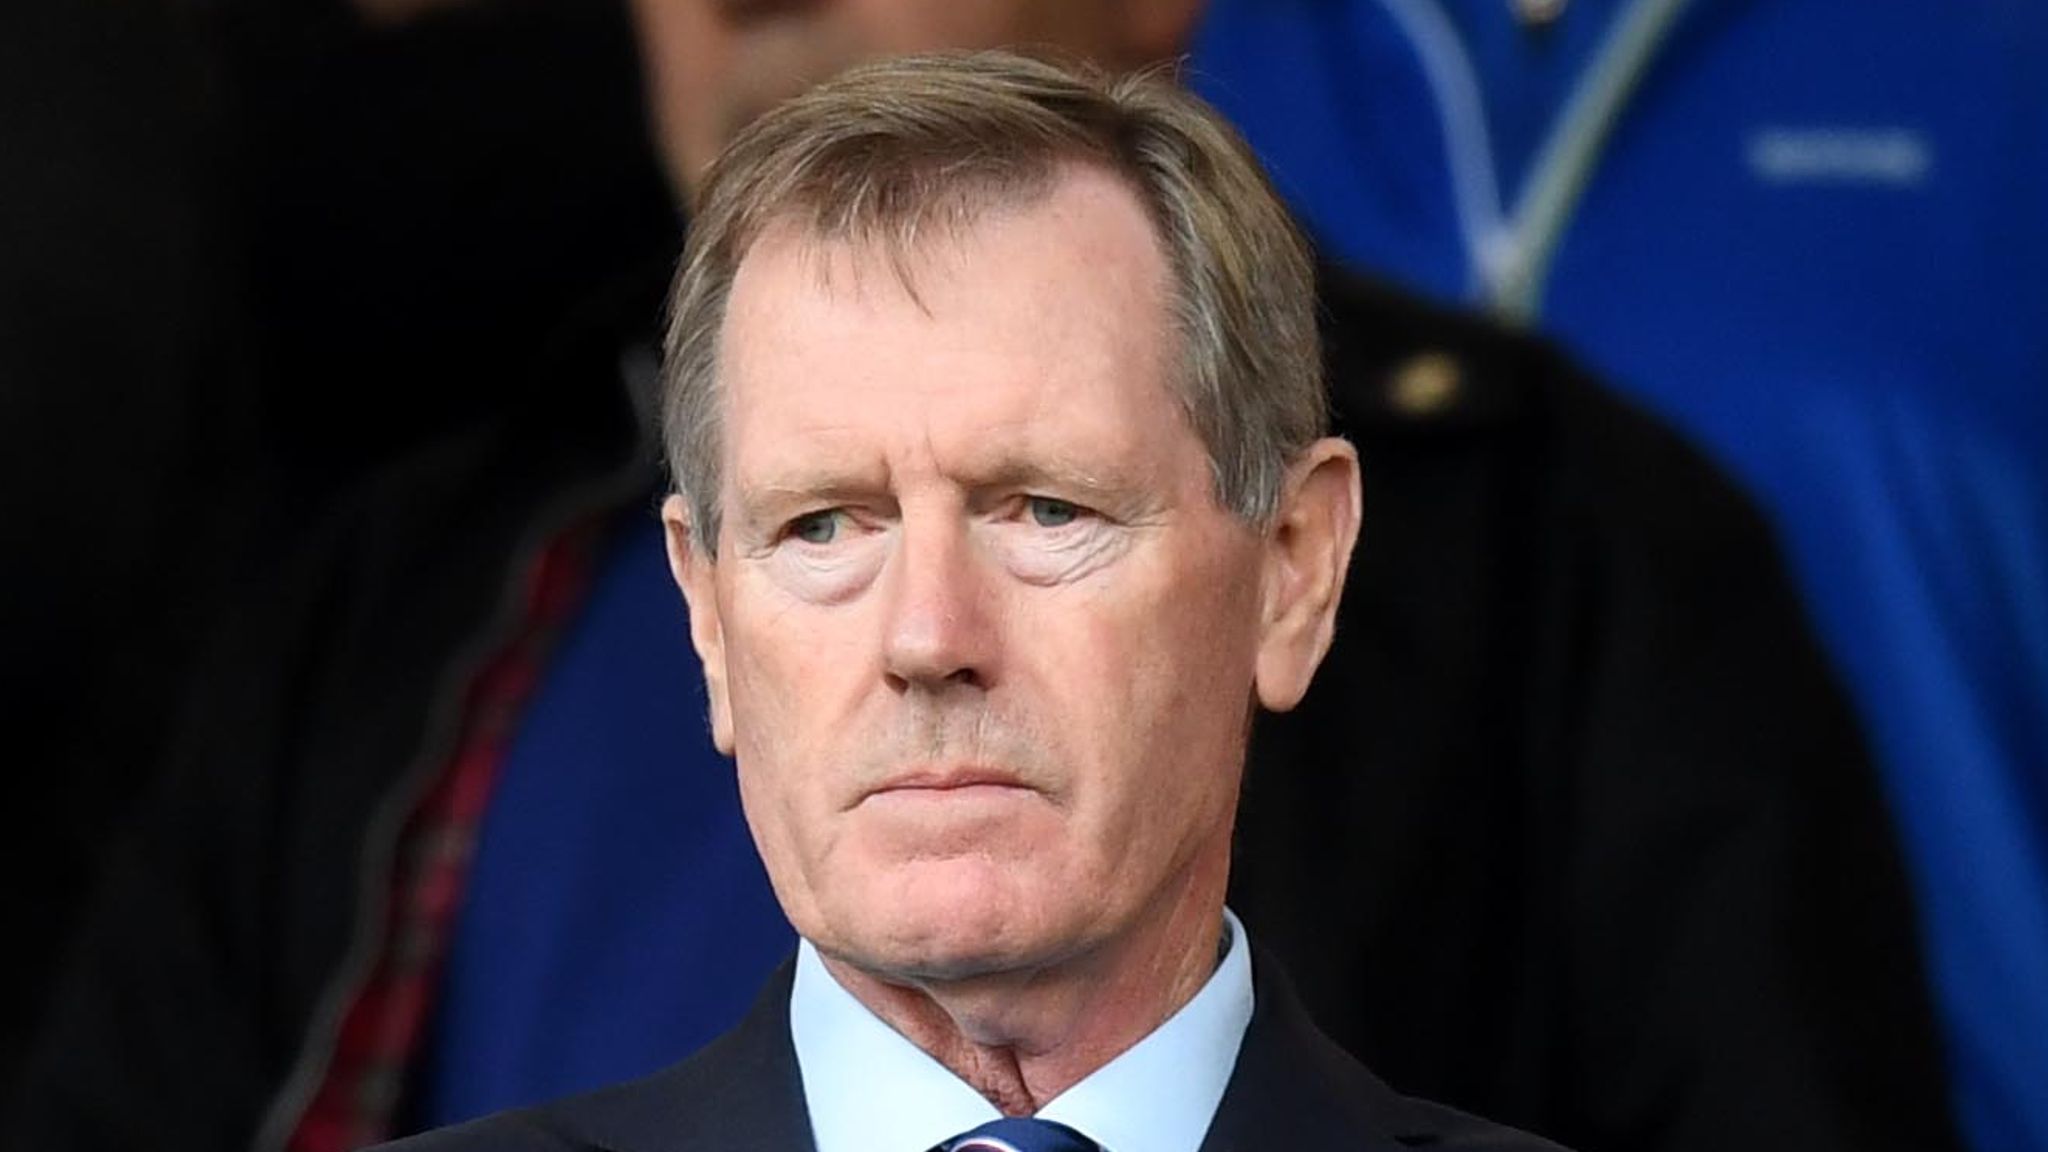 Rangers: Former chairman Dave King ends share deal with fans group Club  1872 | Football News | Sky Sports